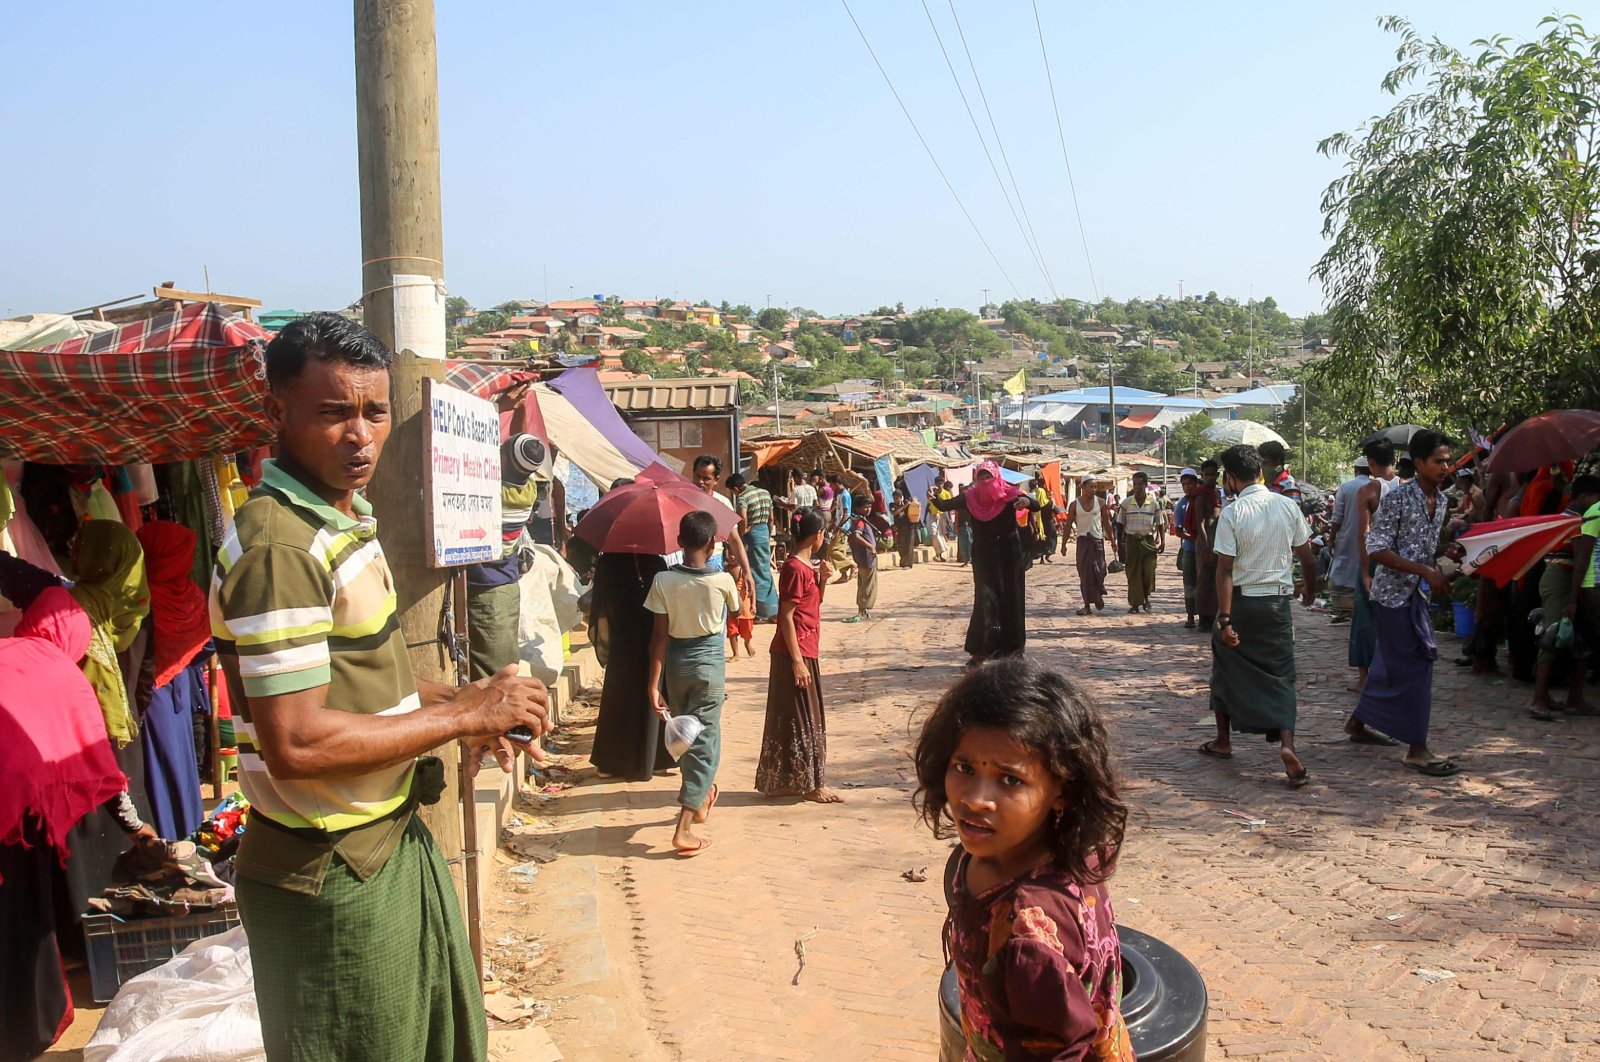 Rohingya refugees gather at a market as the first cases of the coronavirus have emerged in the area, in Kutupalong refugee camp, Ukhia, Bangladesh, May 15, 2020. (AFP Photo)